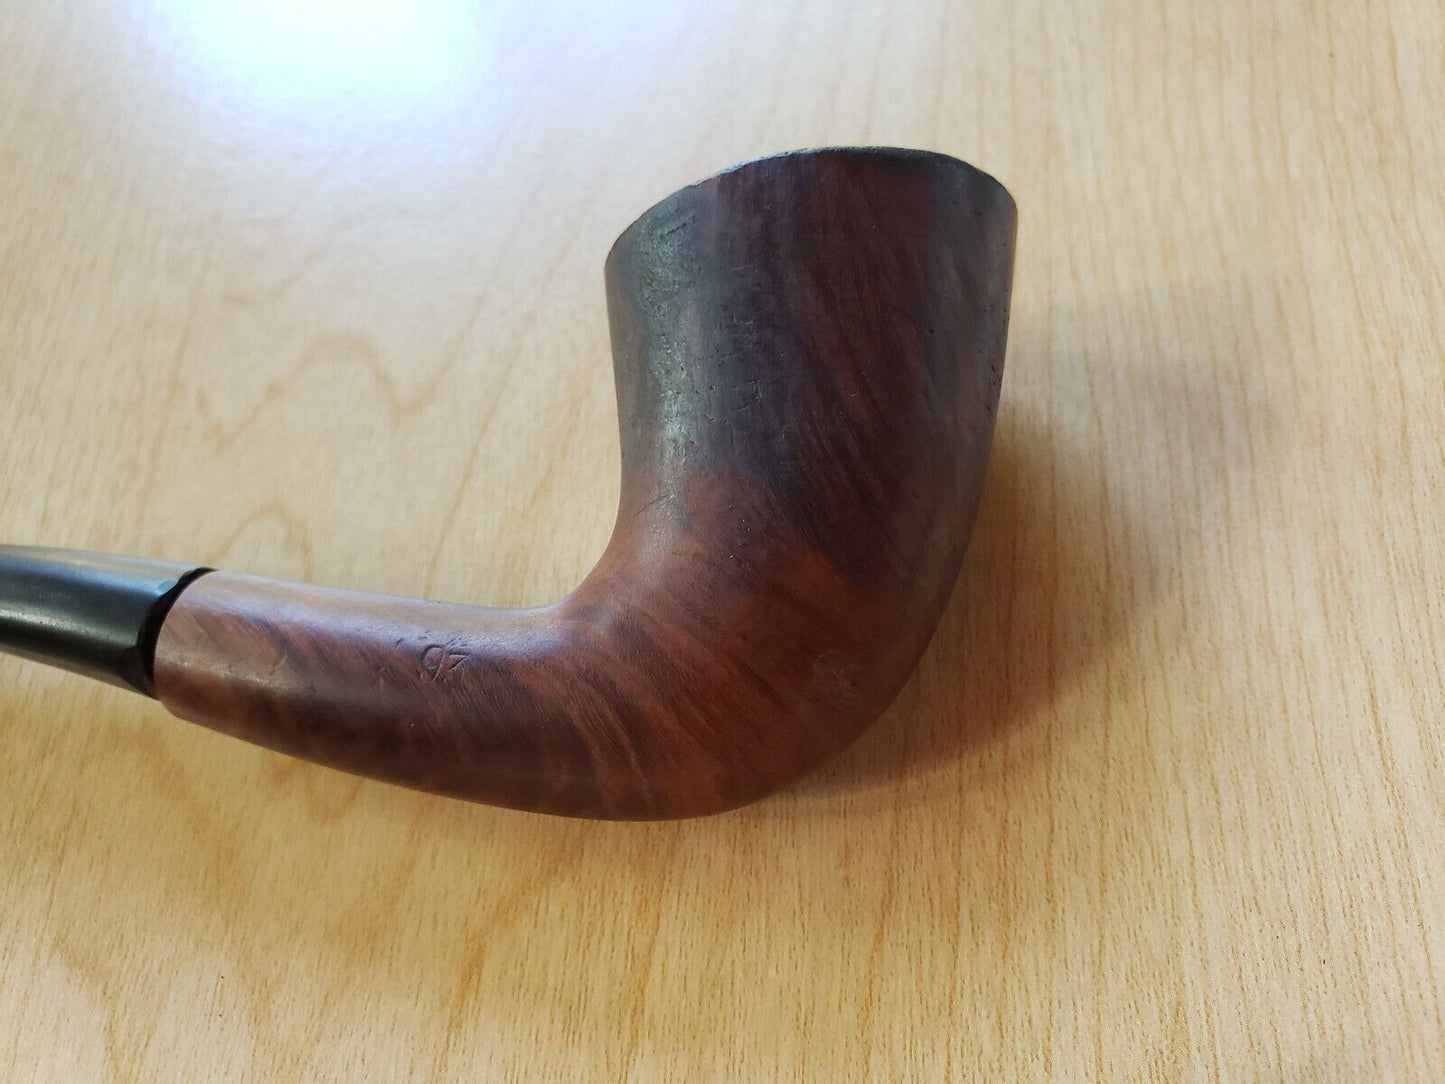 Cherry ROPP Regence #93 smoking pipe 5.75" approx early 1900's